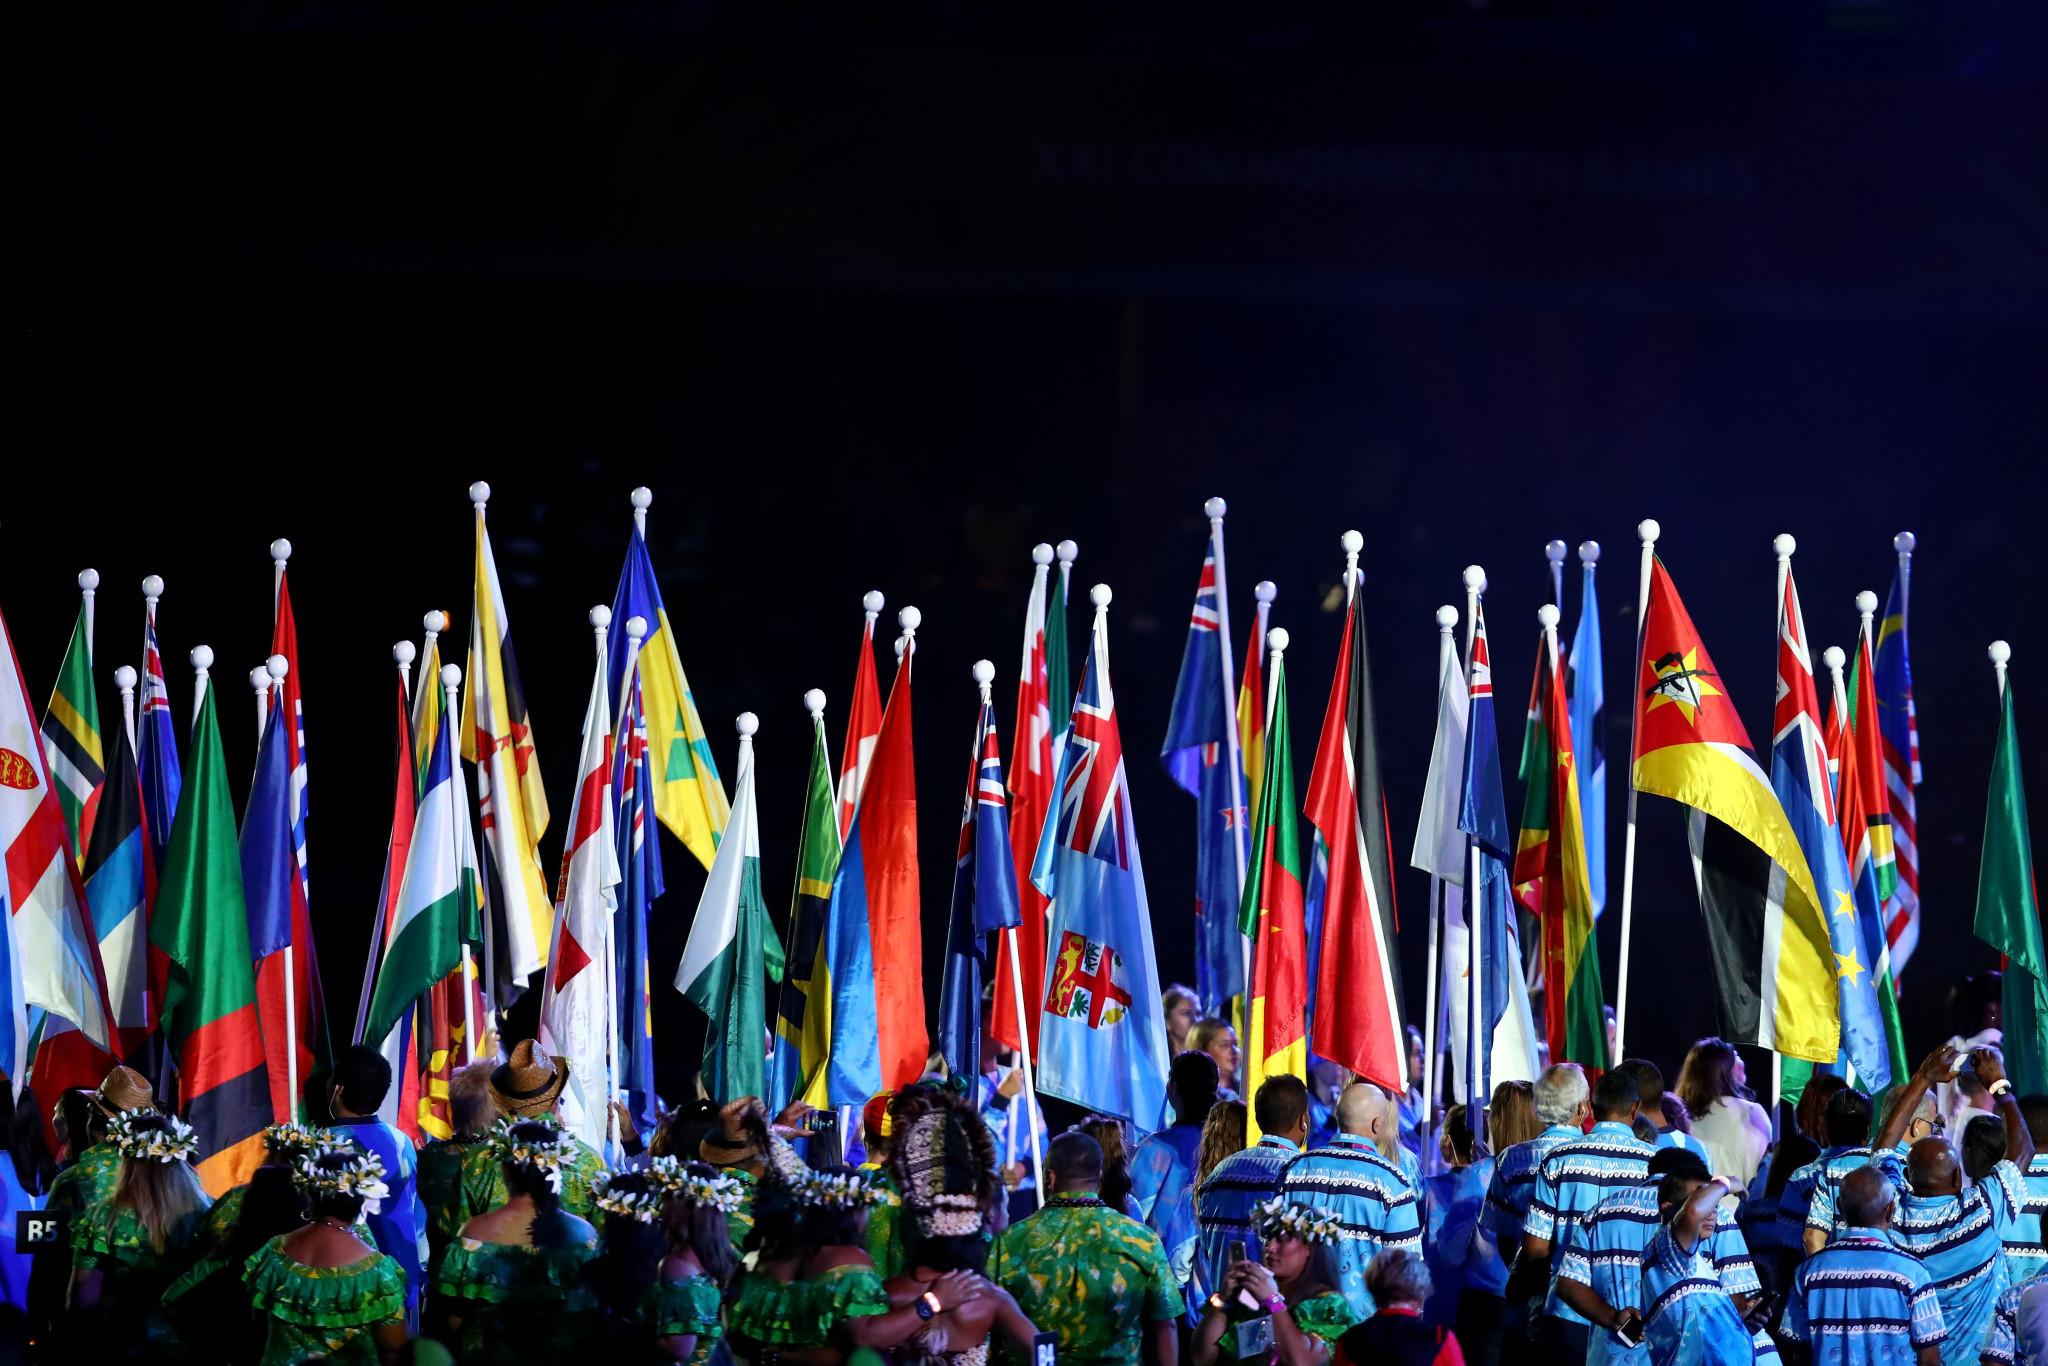 Flags of competing countries are seen during the Opening Ceremony for the Gold Coast 2018 Games ©Getty Images